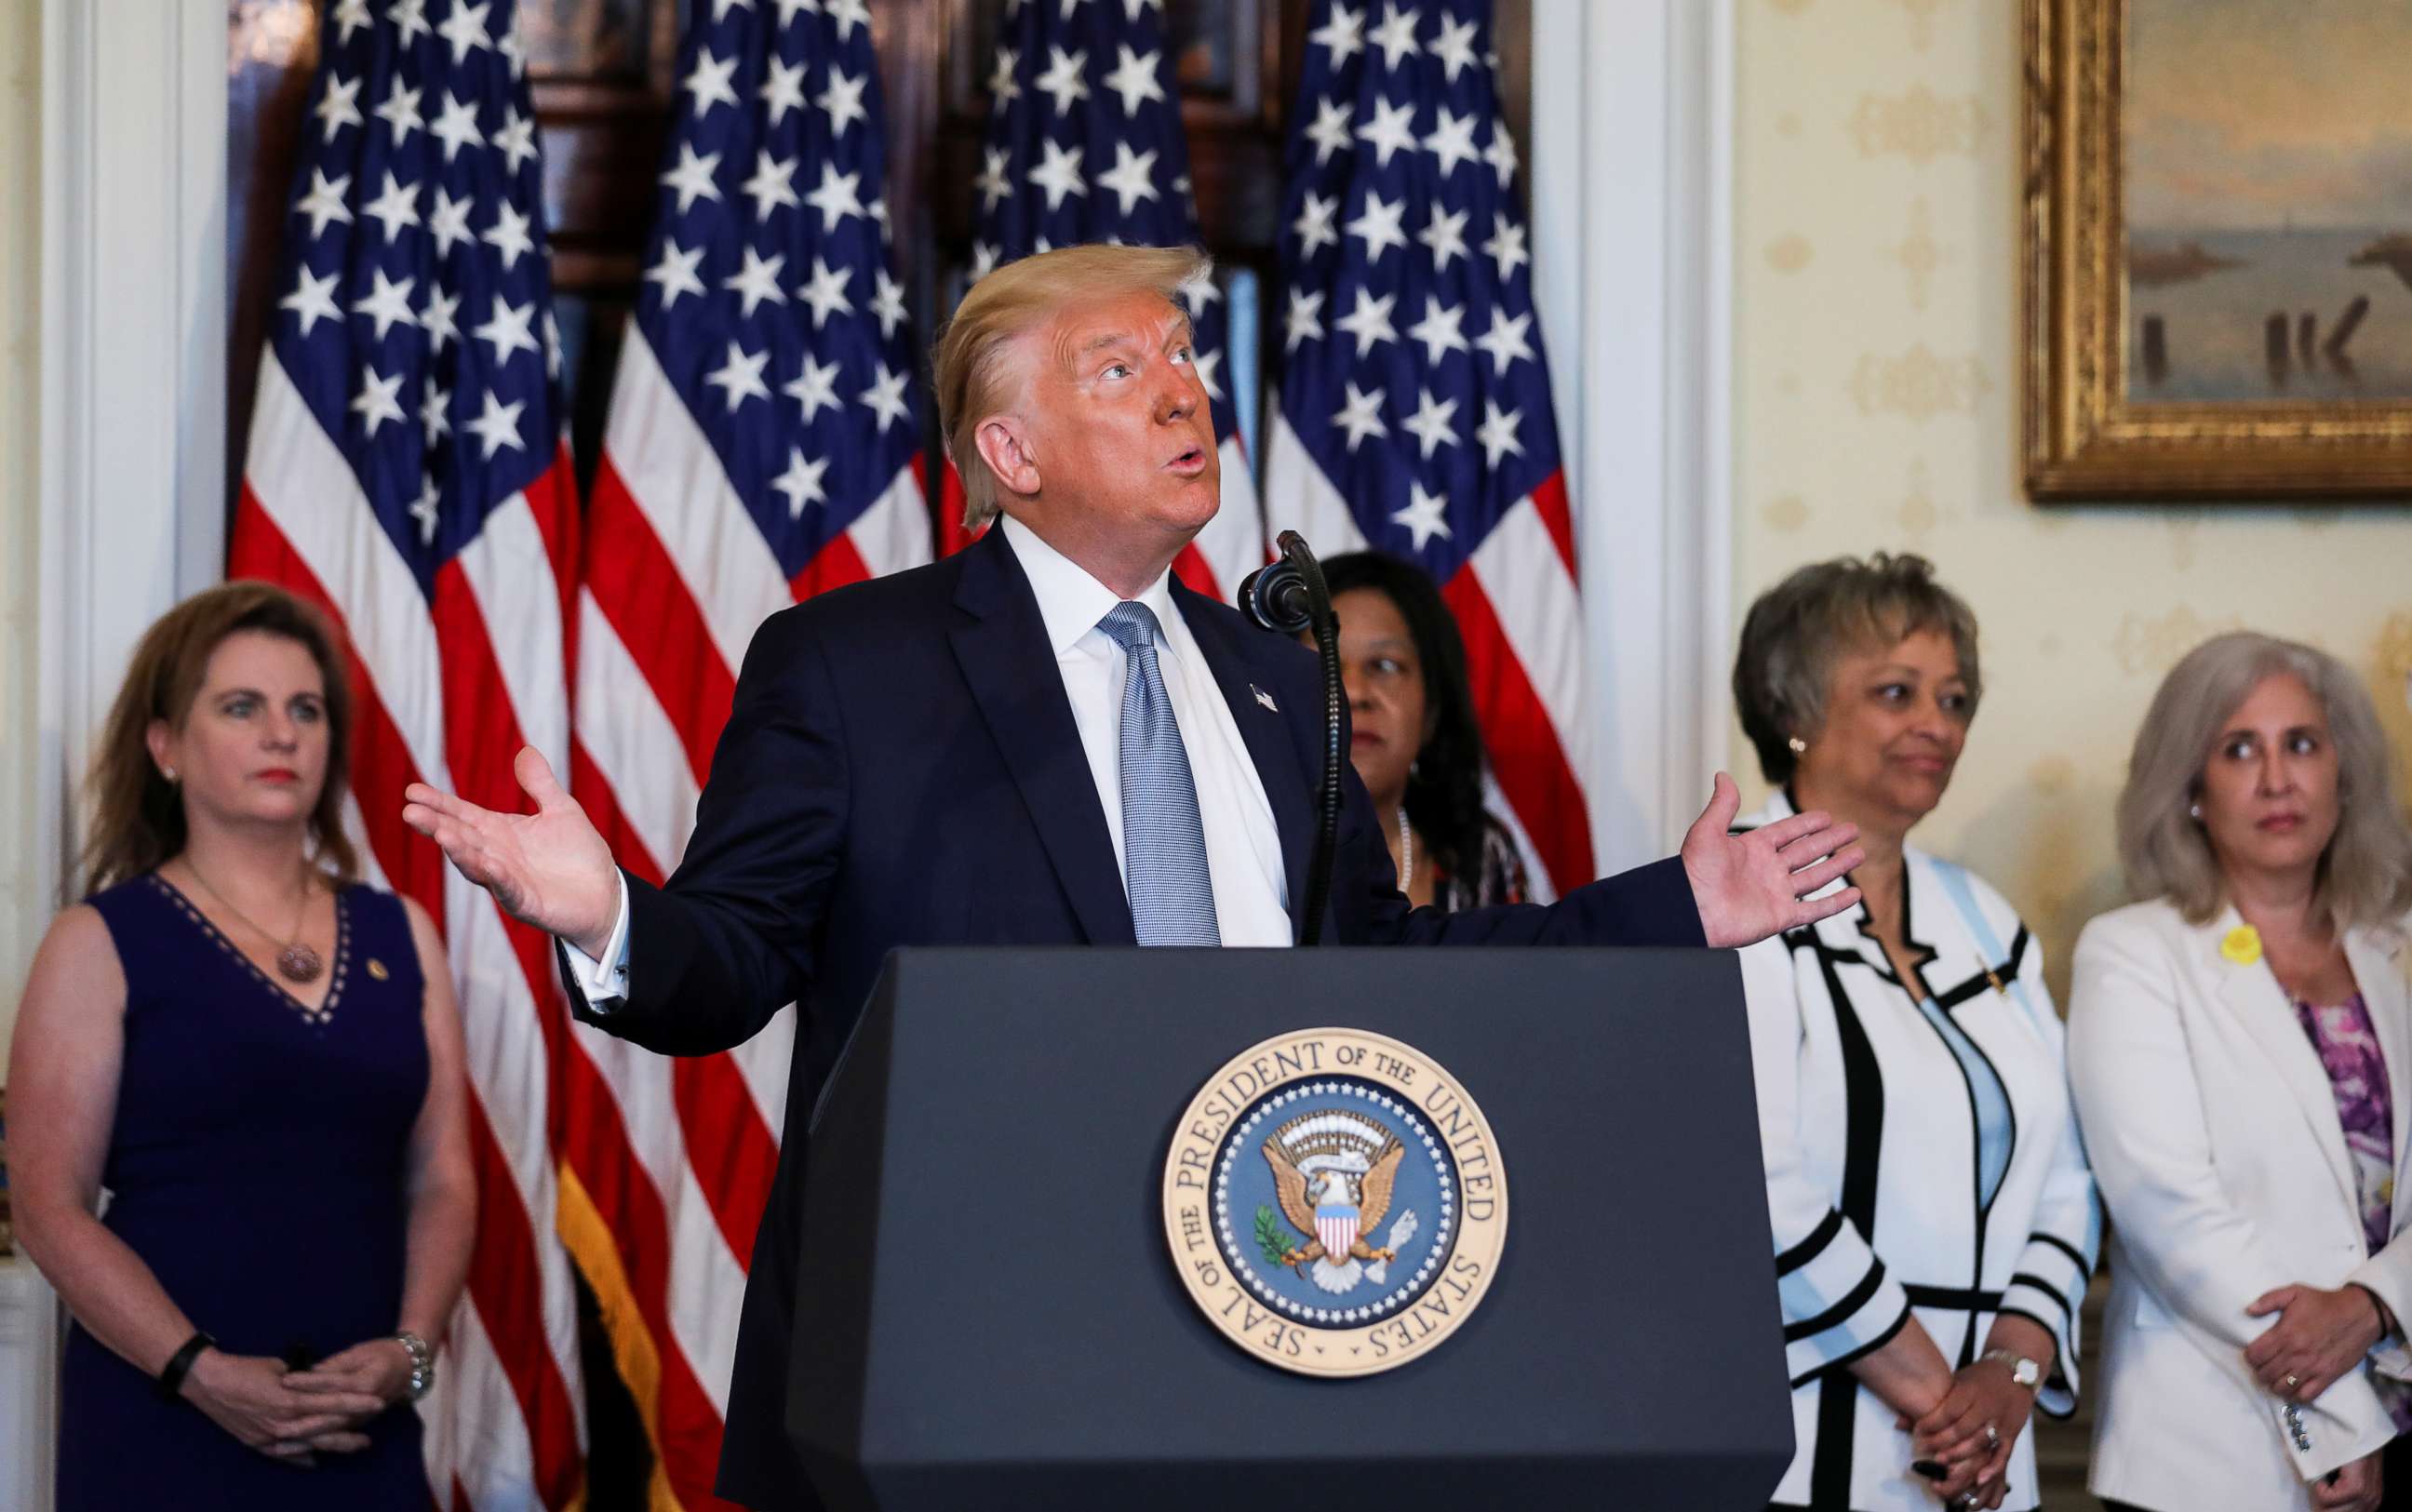 PHOTO: President Donald Trump speaks prior to signing a proclamation on the 100th anniversary of the ratification of the 19th Amendment of the U.S. Constitution during a ceremony at the White House, Aug. 18, 2020.